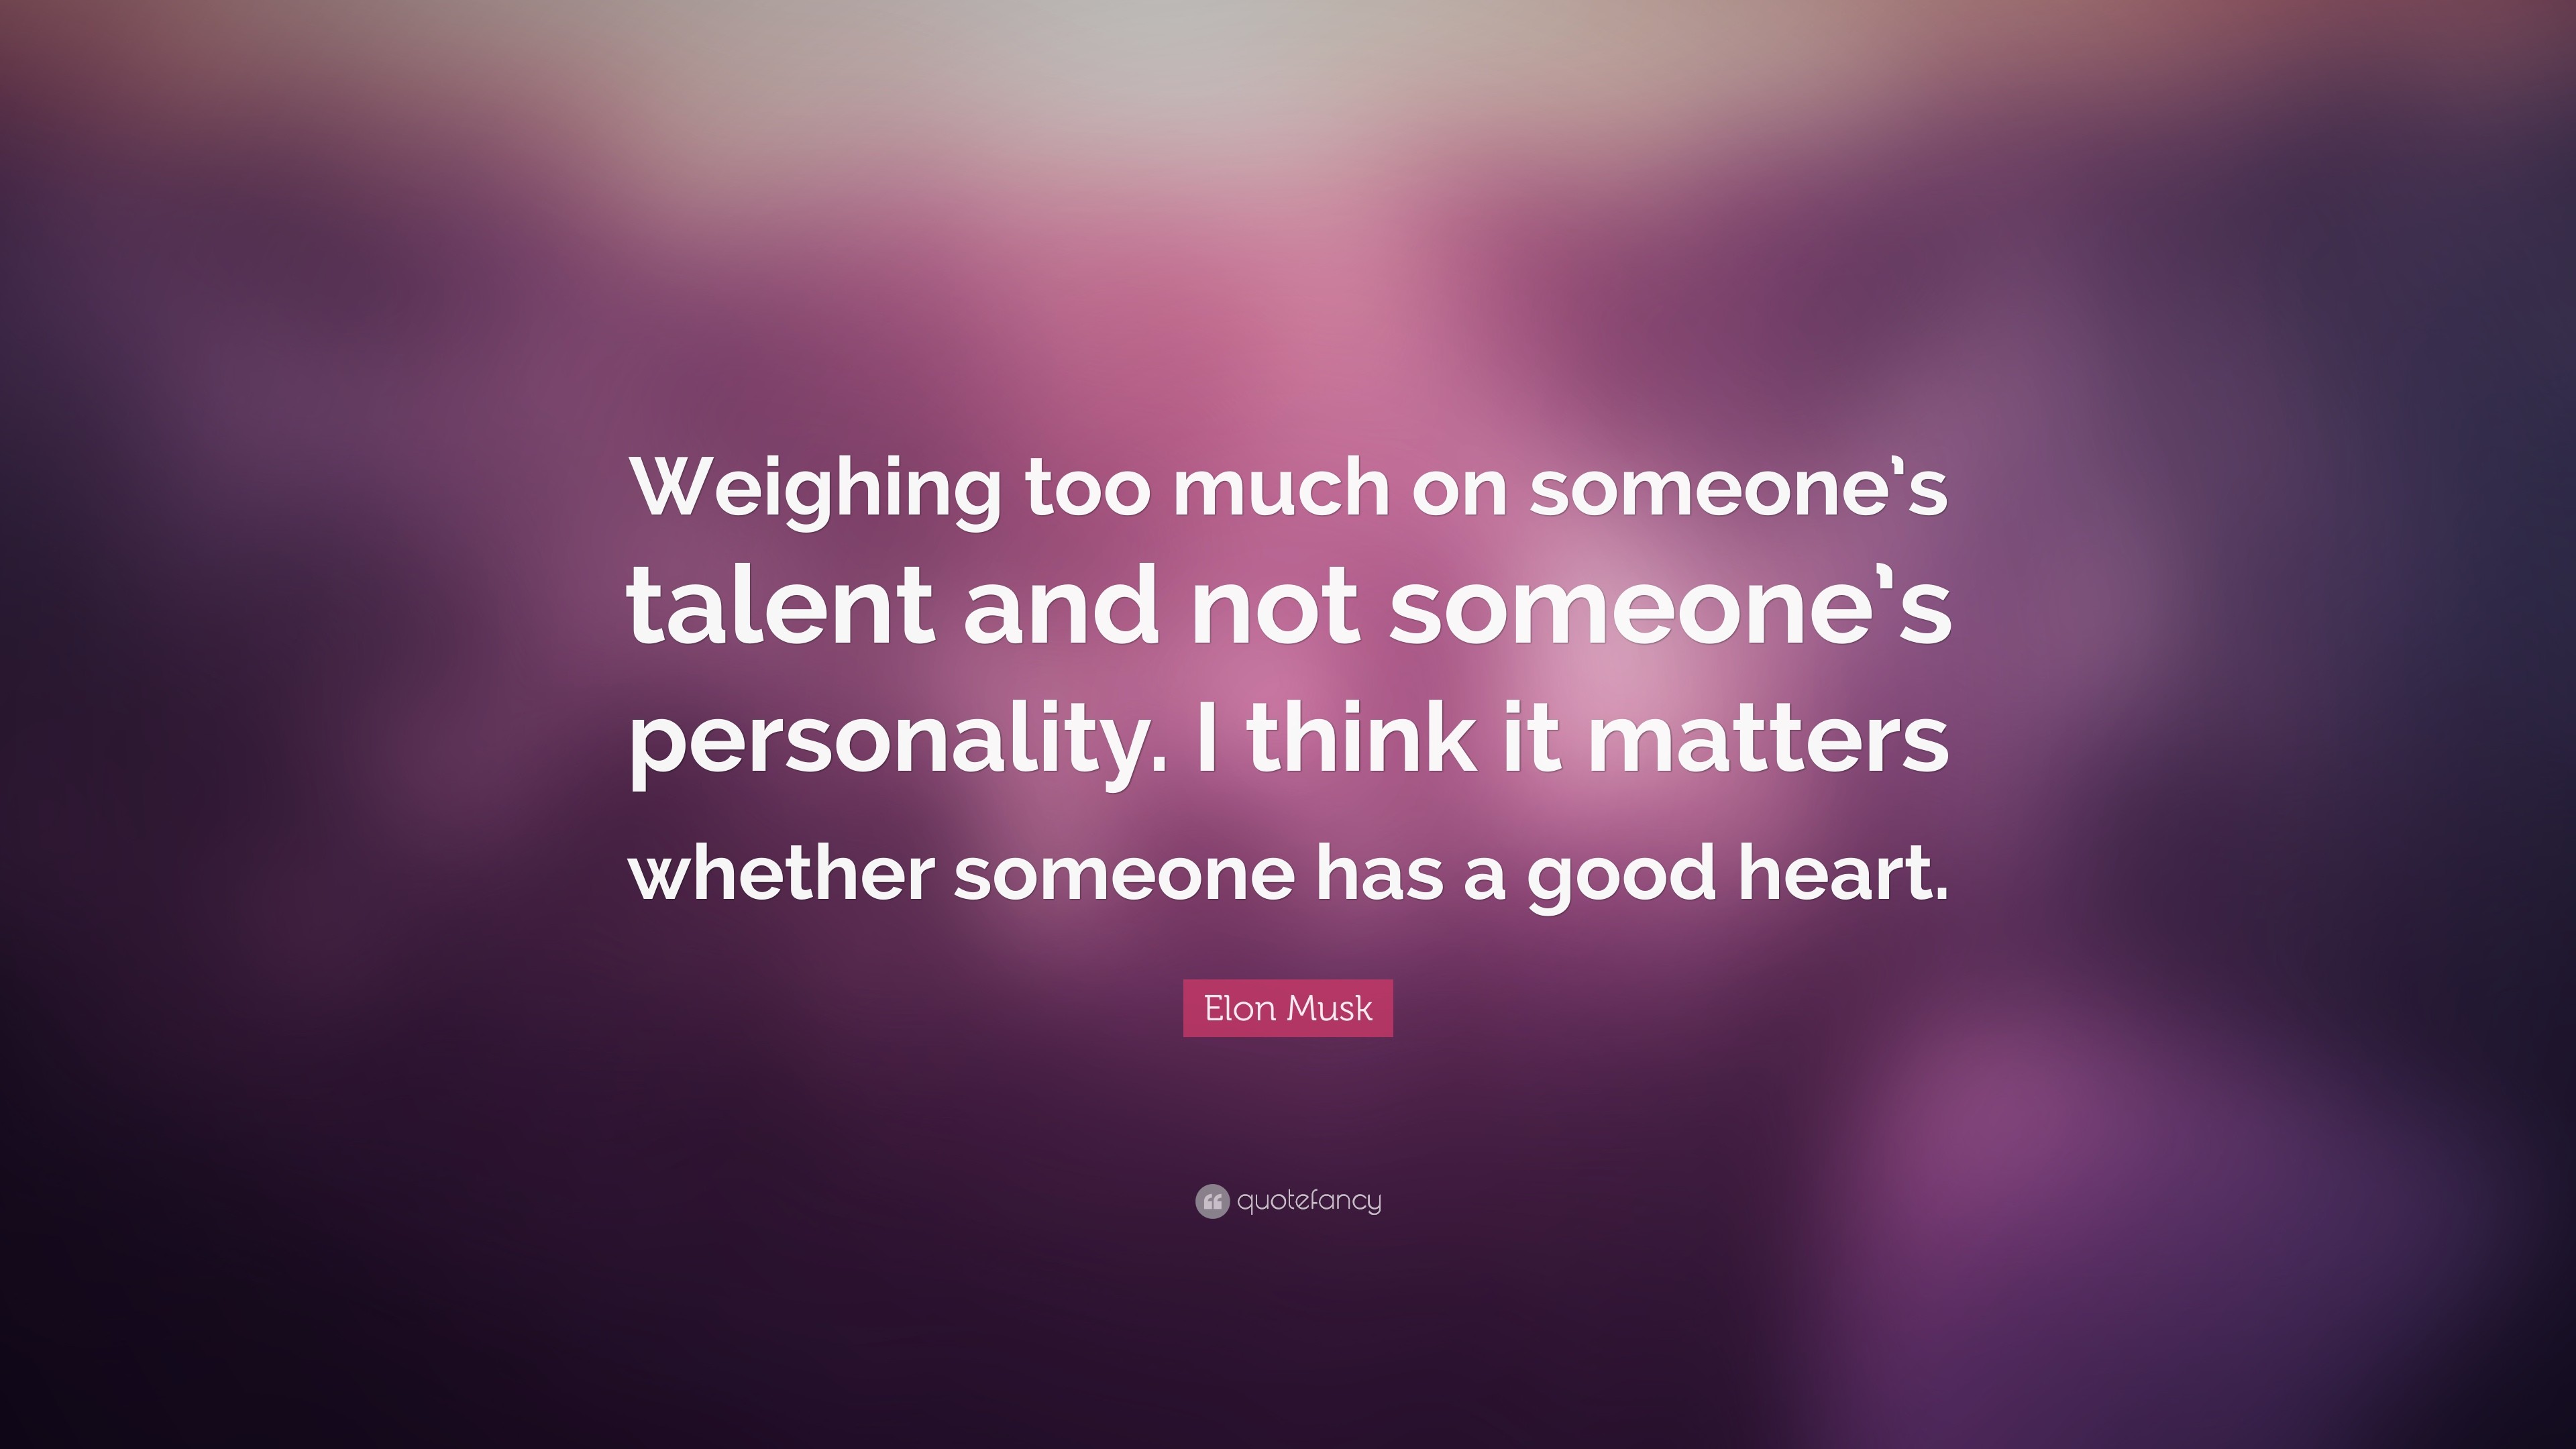 3840x2160 Elon Musk Quote: “Weighing too much on someone's talent and not someone's  personality.